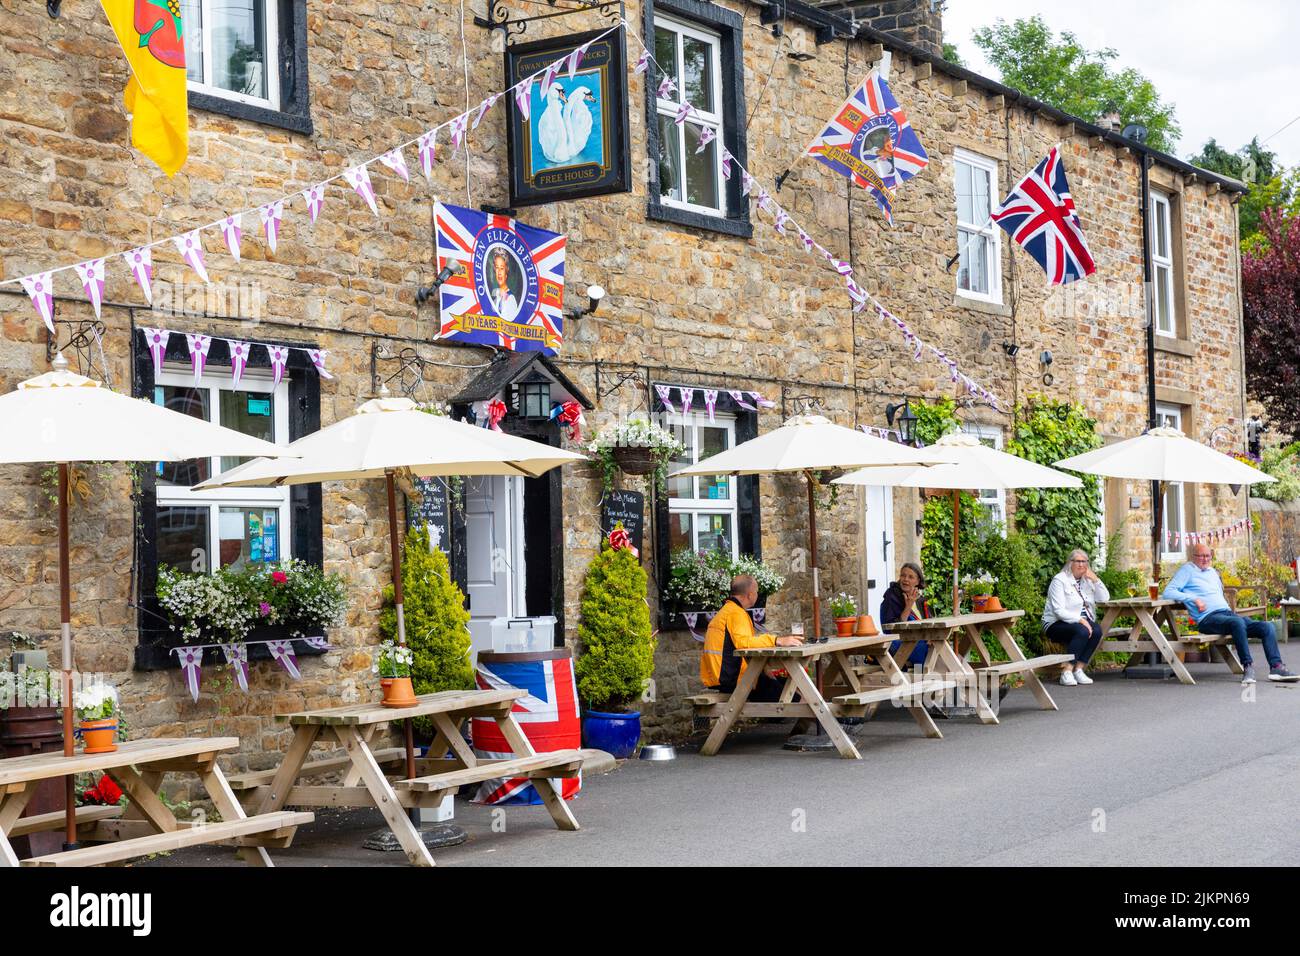 Platinum celebrations for Queen Elizabeth at the Swan with two Necks pub in Pendleton, village in Lancashire,England,UK with union jacks displayed Stock Photo